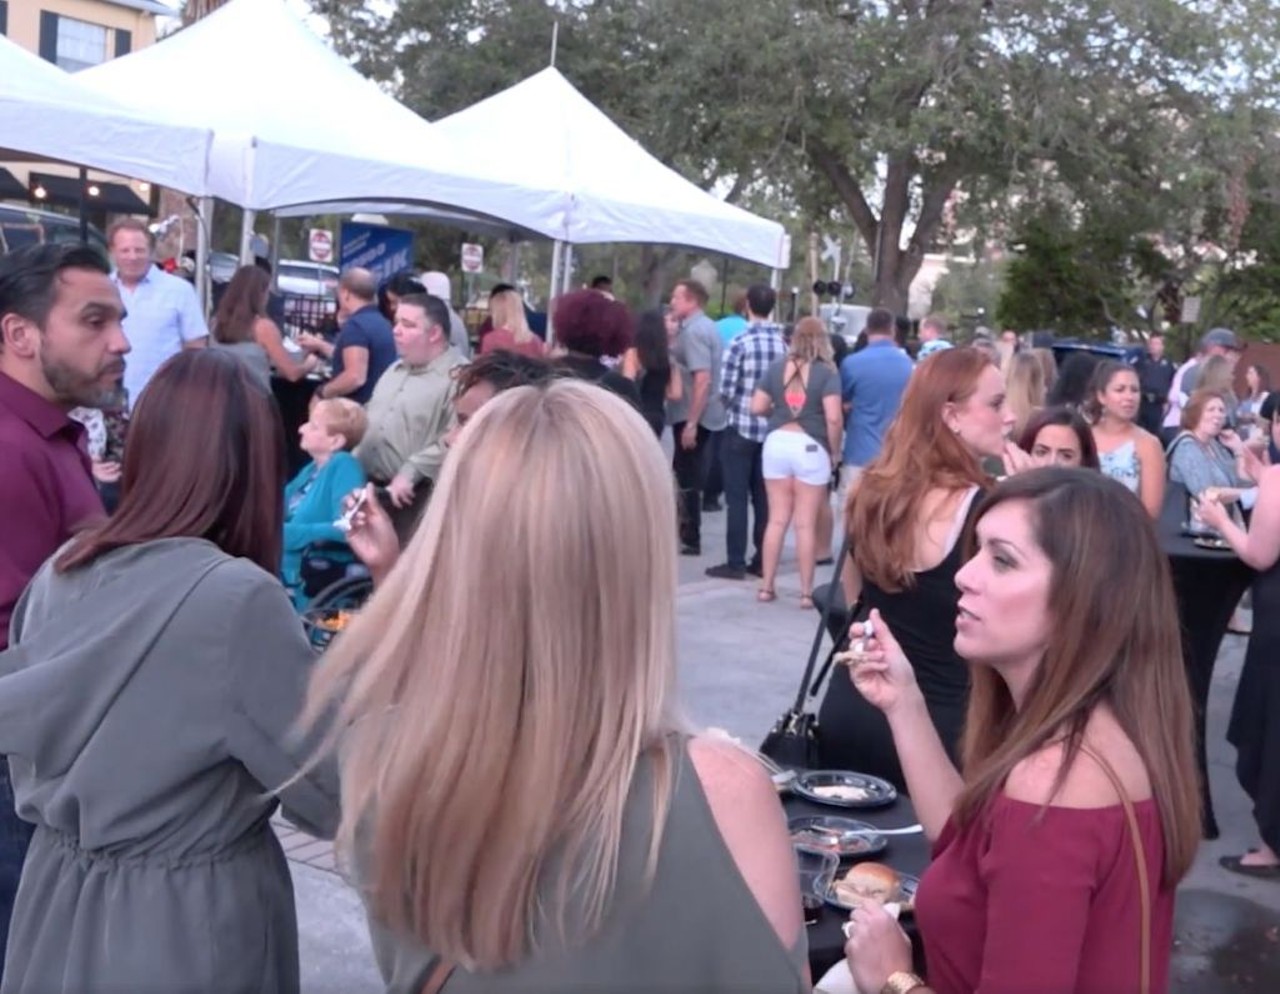 Wednesday, March 21
Winter Park Wine & Dine 
A food, wine and music festival with bites from 35 of the area's restaurants. 6:30-9:30 pm; Winter Park Farmers Market, 200 W. New England Ave., Winter Park; $39-$290; winterparkevents.com.Photo via Winter Park Wine & Dine/ Facebook